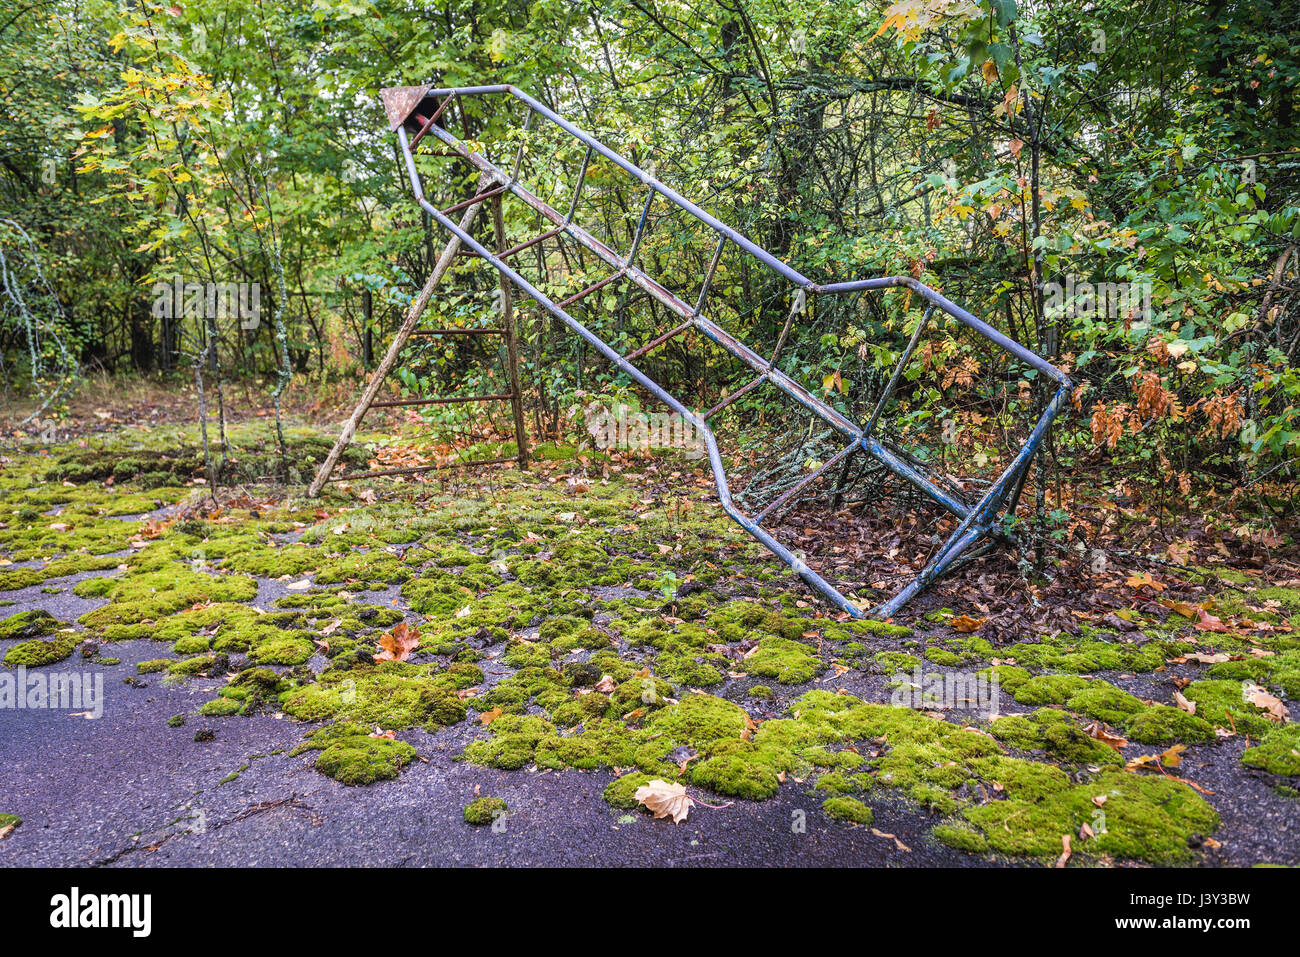 Playground in Pripyat ghost city of Chernobyl Nuclear Power Plant Zone of Alienation around nuclear reactor disaster in Ukraine Stock Photo